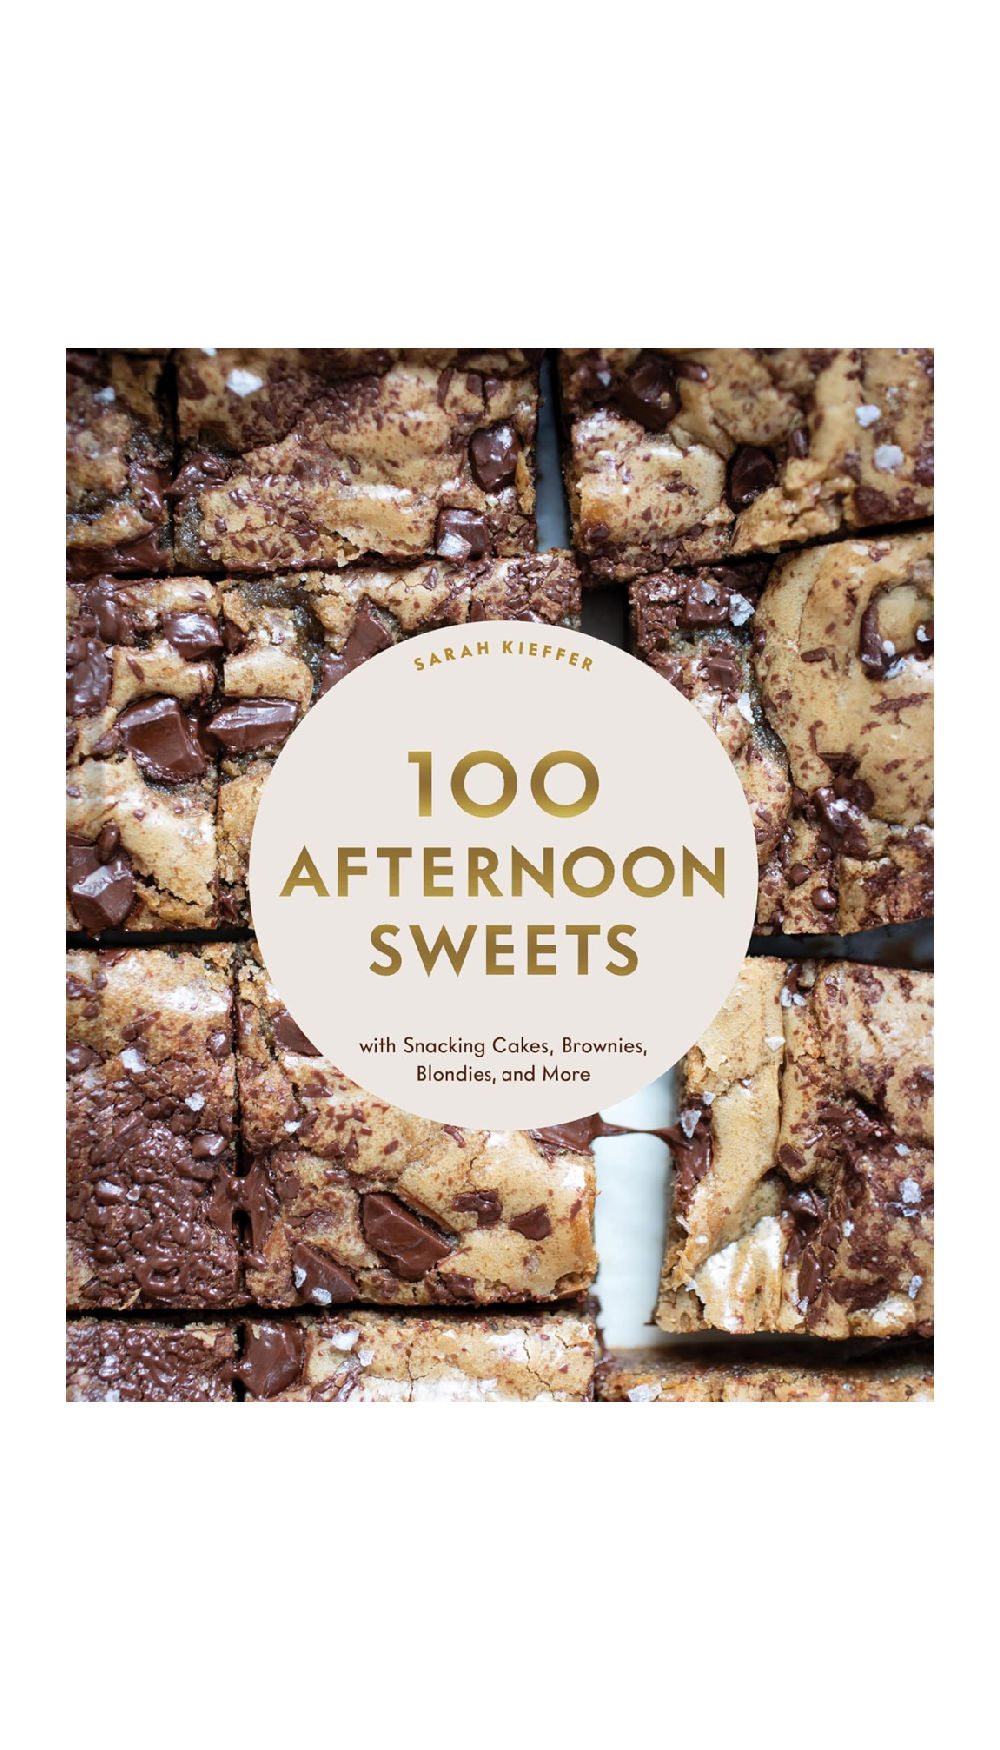 100 Afternoon Sweets / COMING OCT. 8TH!